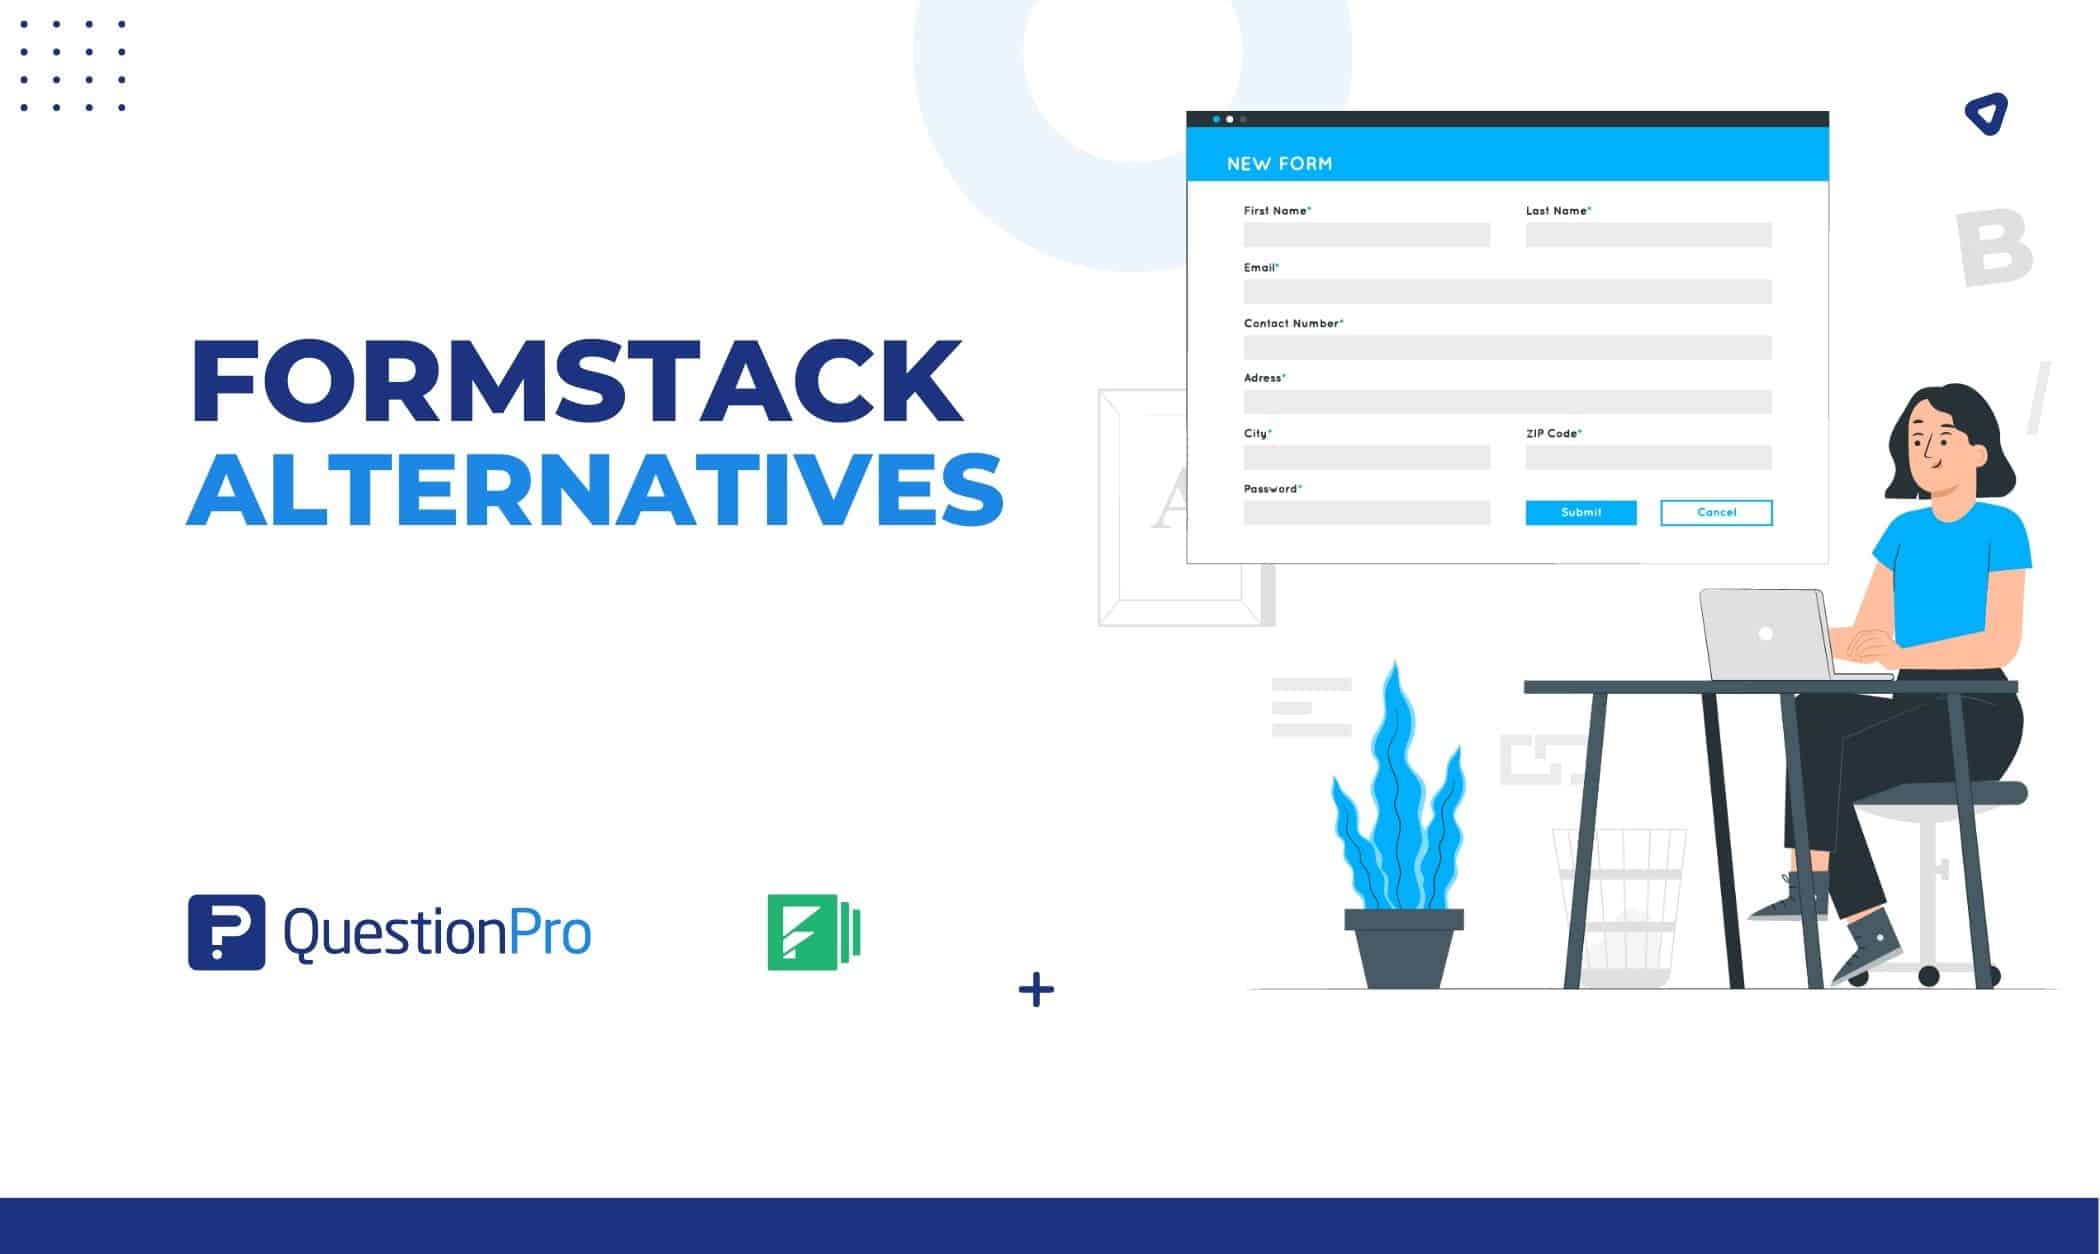 Are you looking for the top Formstack alternatives? Check out the list to see if it has all the industrial applications your business needs.